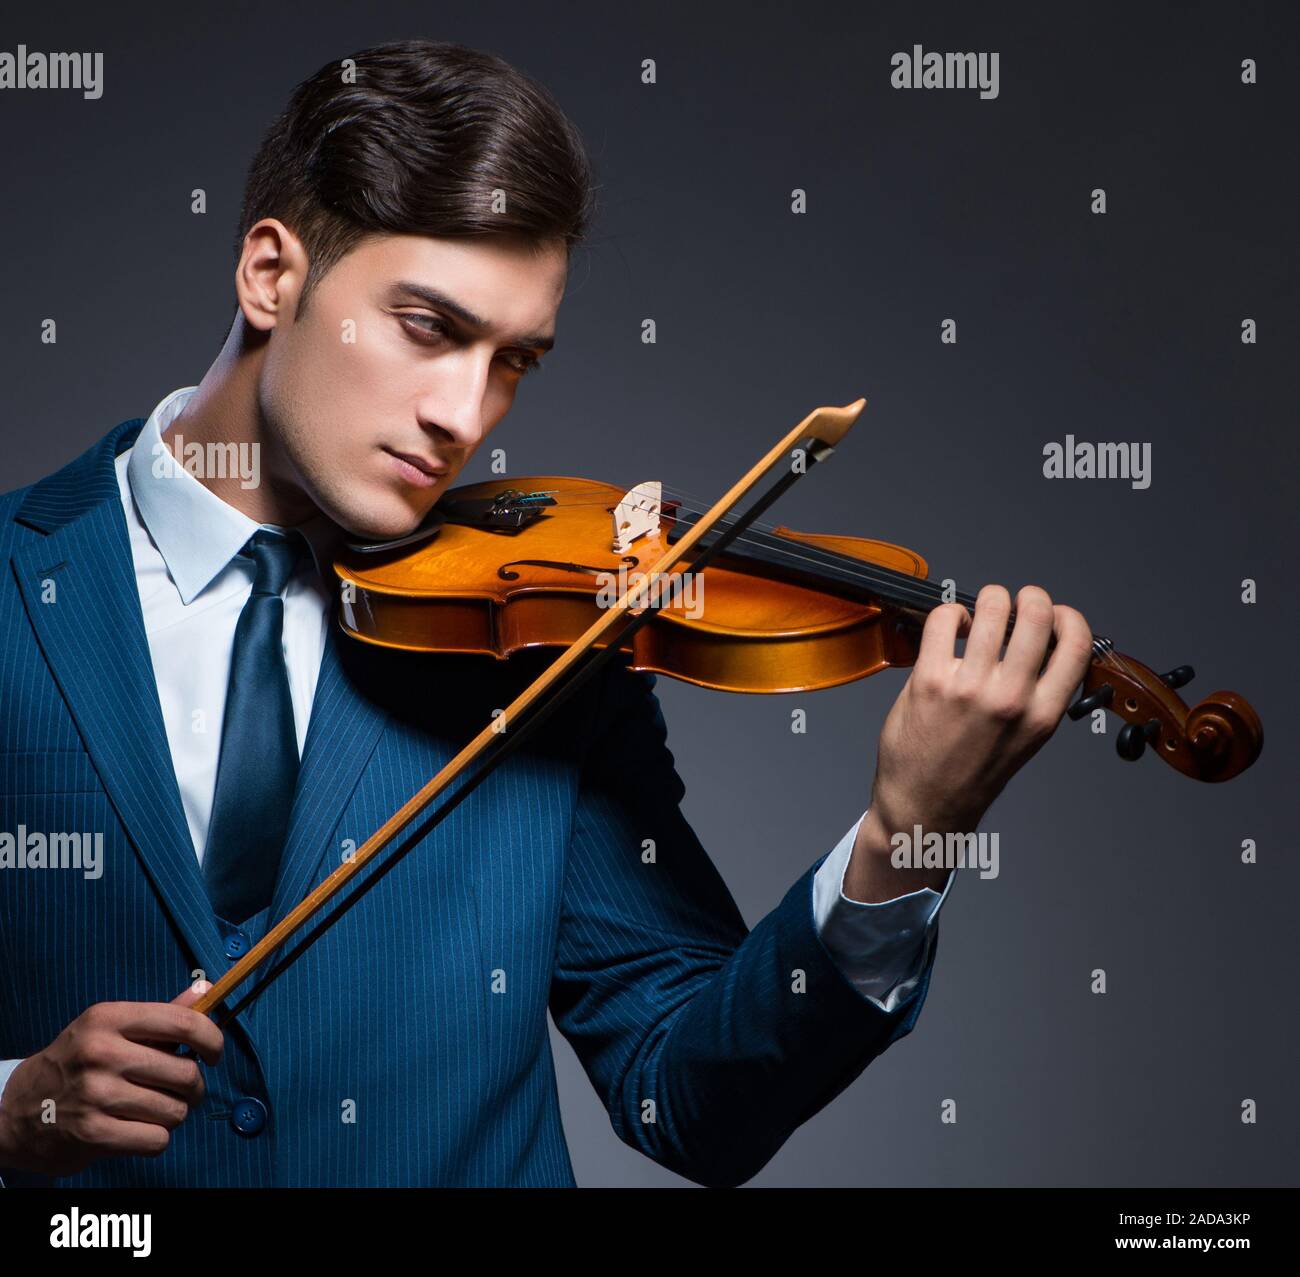 Young man playing violin in dark room Banque D'Images